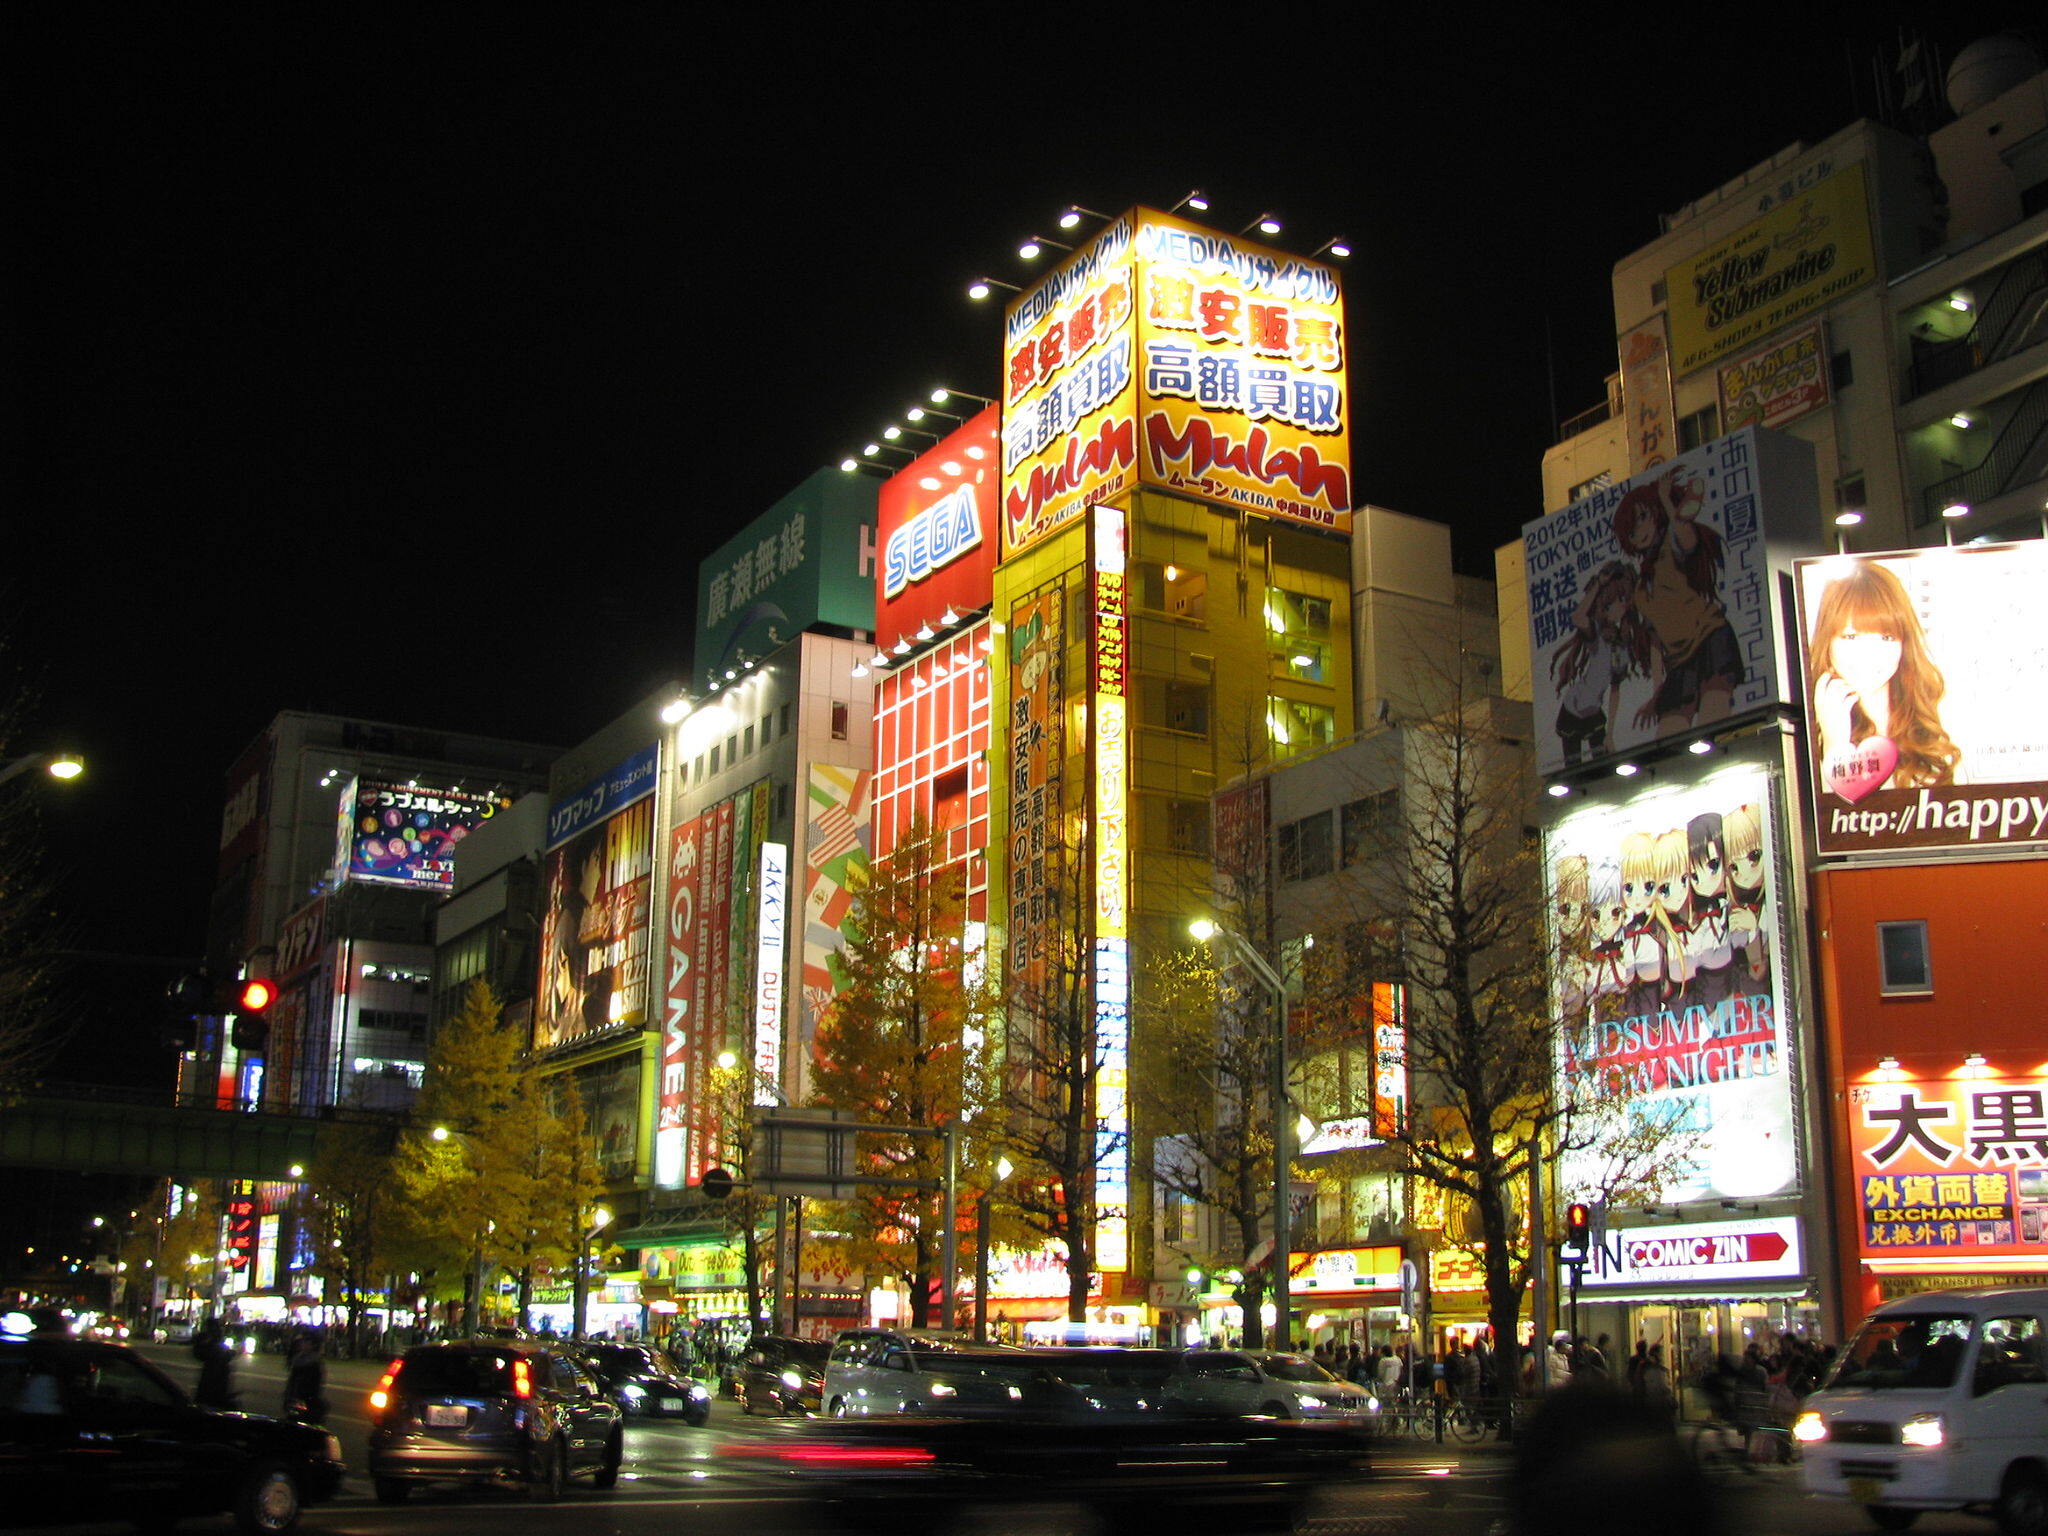 The Gamers Main store in the Akihabara. This location is in Chiyoda, Tokyo, Japan.